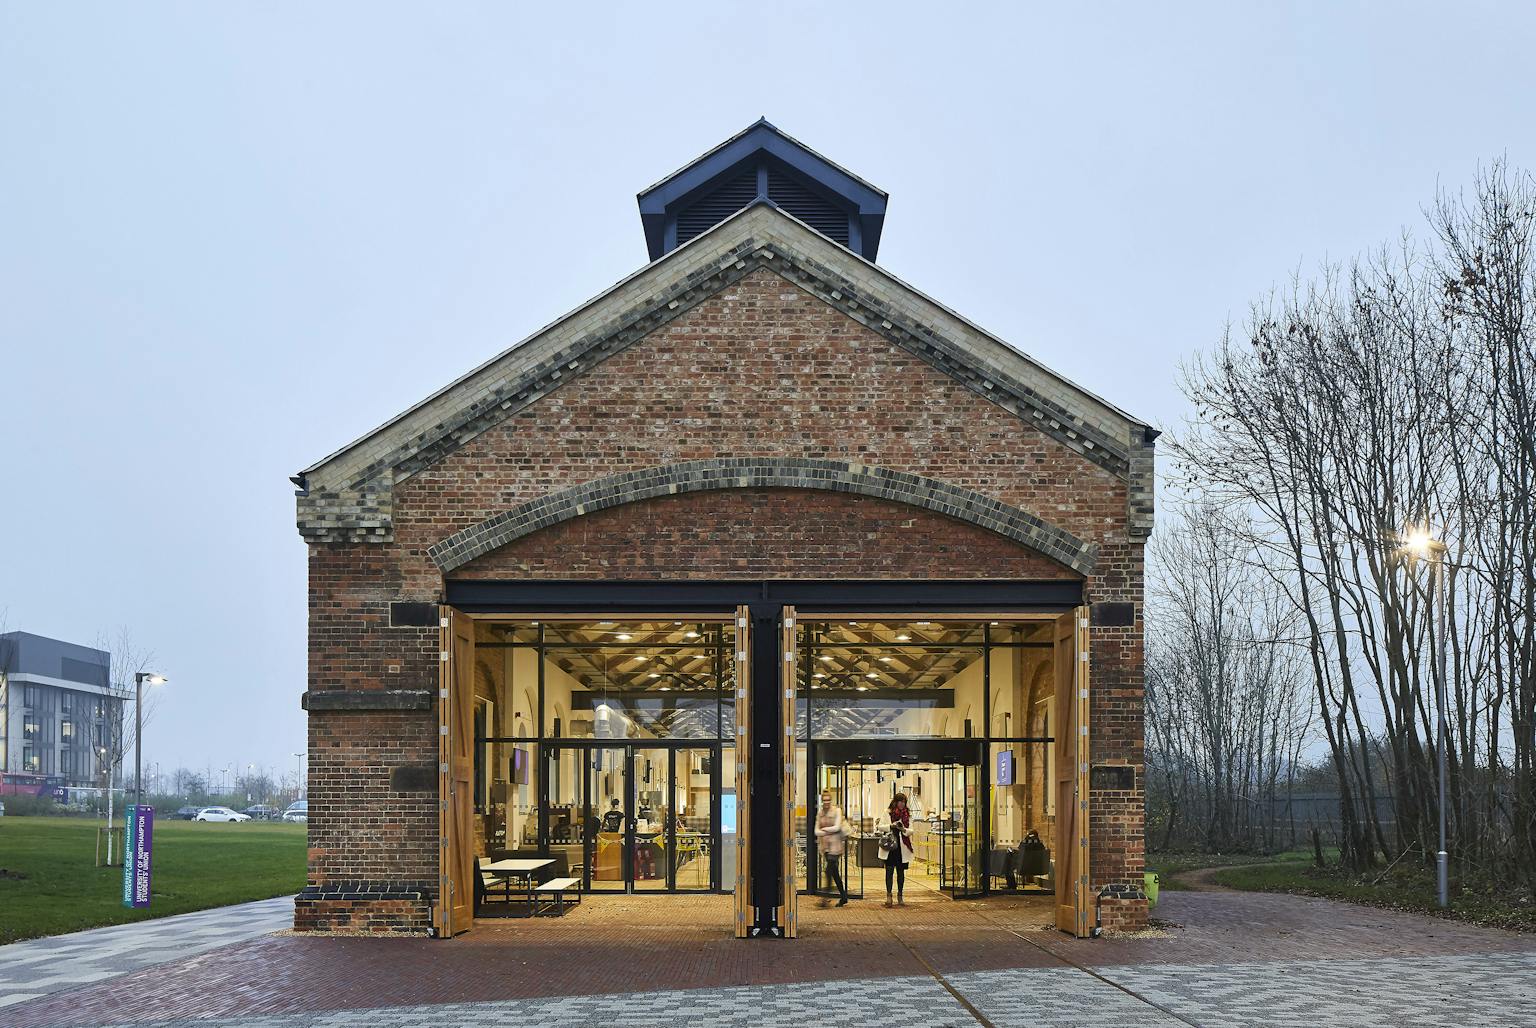 Purcell restored a derelict engine shed in the University of Northampton's Waterside Enterprise Zone to create a new Students' Union.